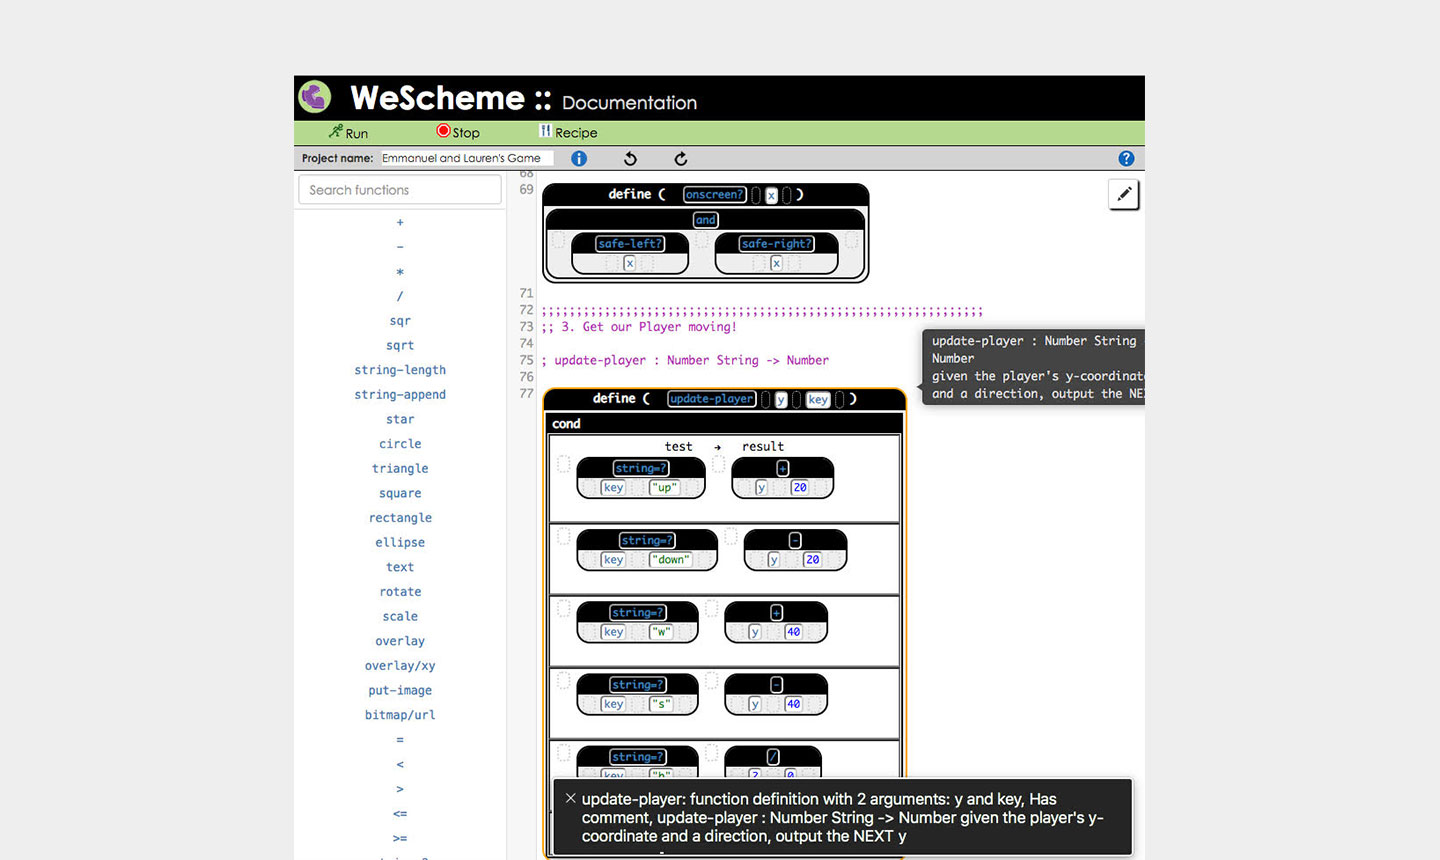 We Scheme Interface: Documentation page. On the left is a column of functions with a search box; on the right a column of images of code block elements and programming documentation.